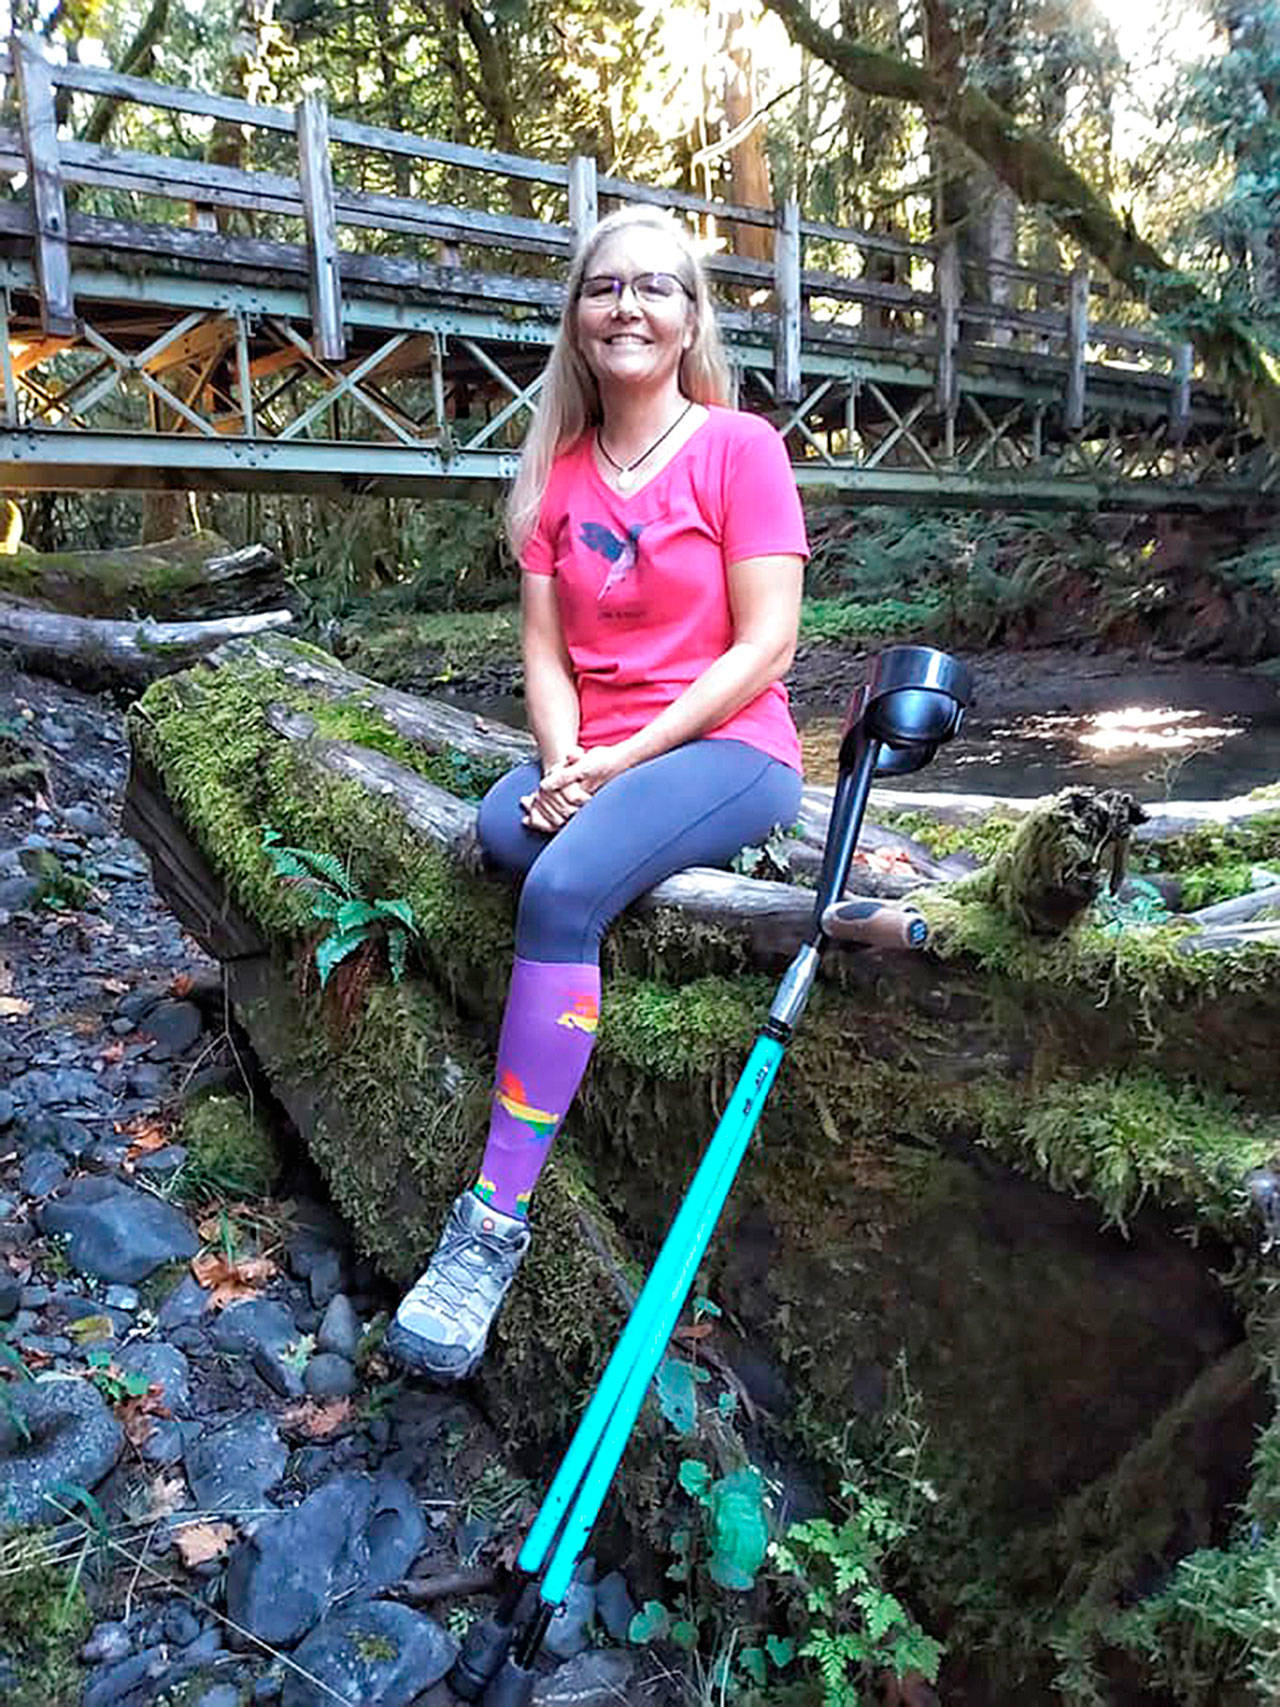 Photo courtesy of Colton McCoy Port Angeles amputee Dana Lawson is a survivor of multiple bouts of cancer and domestic violence. She plans to compete in the North Olympic Discovery Marathon in June to raise awareness for her group Unbounded Horizons, which helps domestic violence survivors heal through nature.